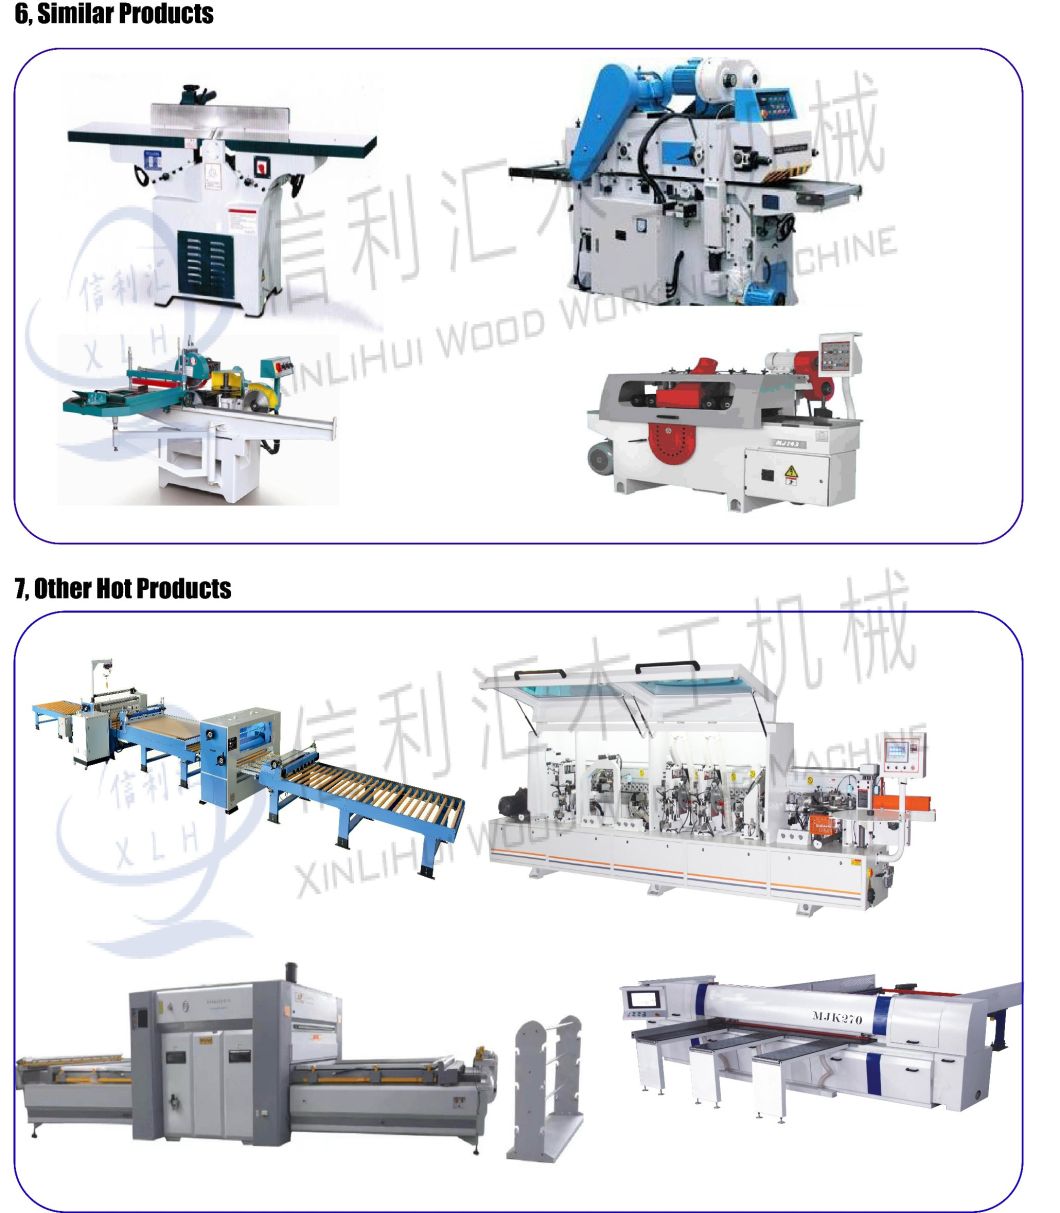 Wood Plate Sole Edge Roughing Machine Wood Tray Plywood Box Edge Milling Machine Plywood Crate Making Machine, Wood Crate Machine, Export Wood Crate Boxes